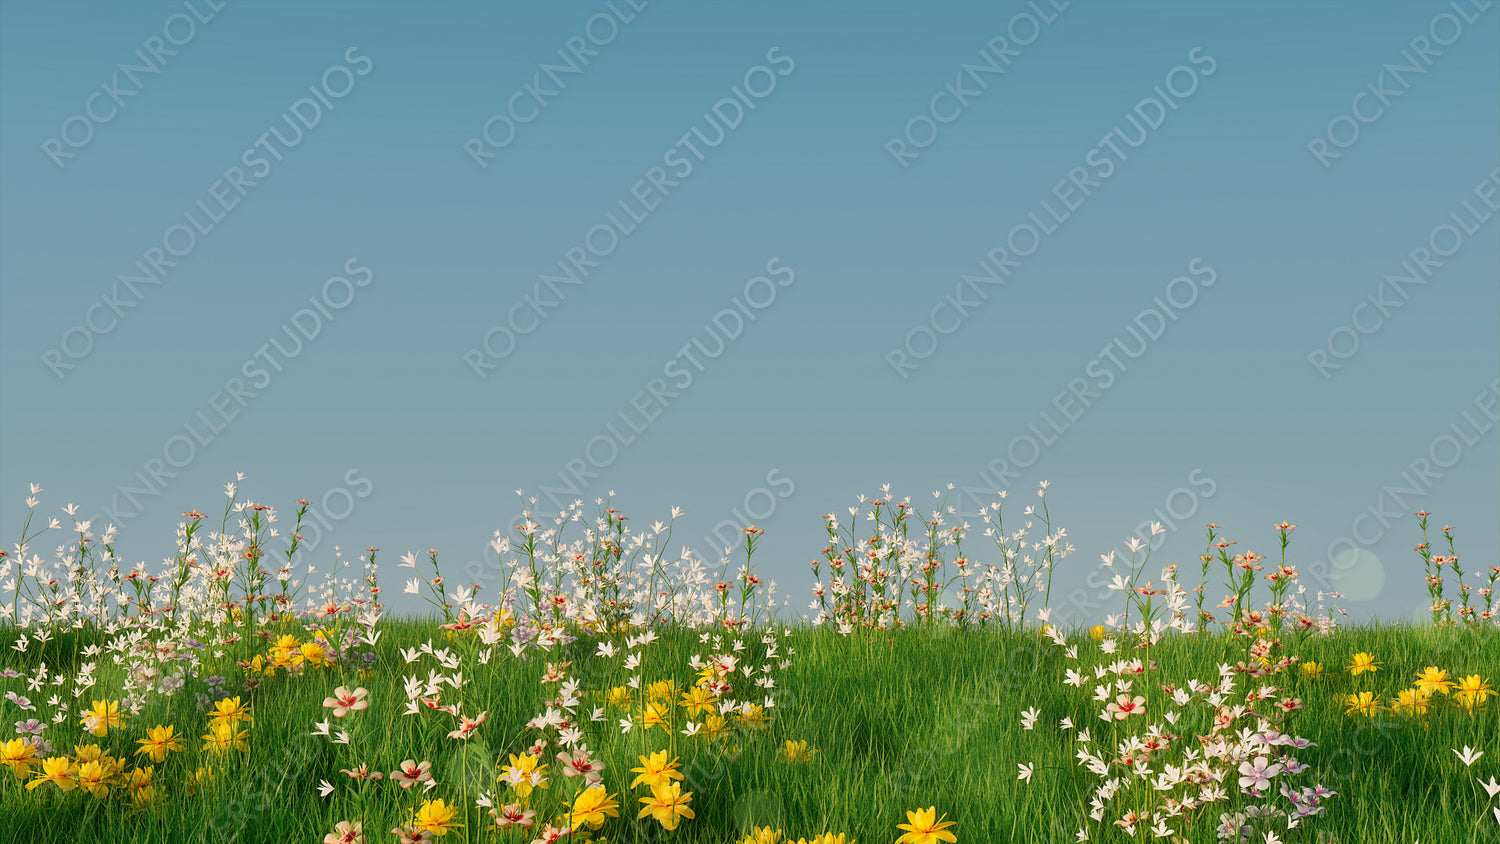 Spring Meadow with Long Grass, Wild Flowers and clear blue sky. Nature Background with space for text.